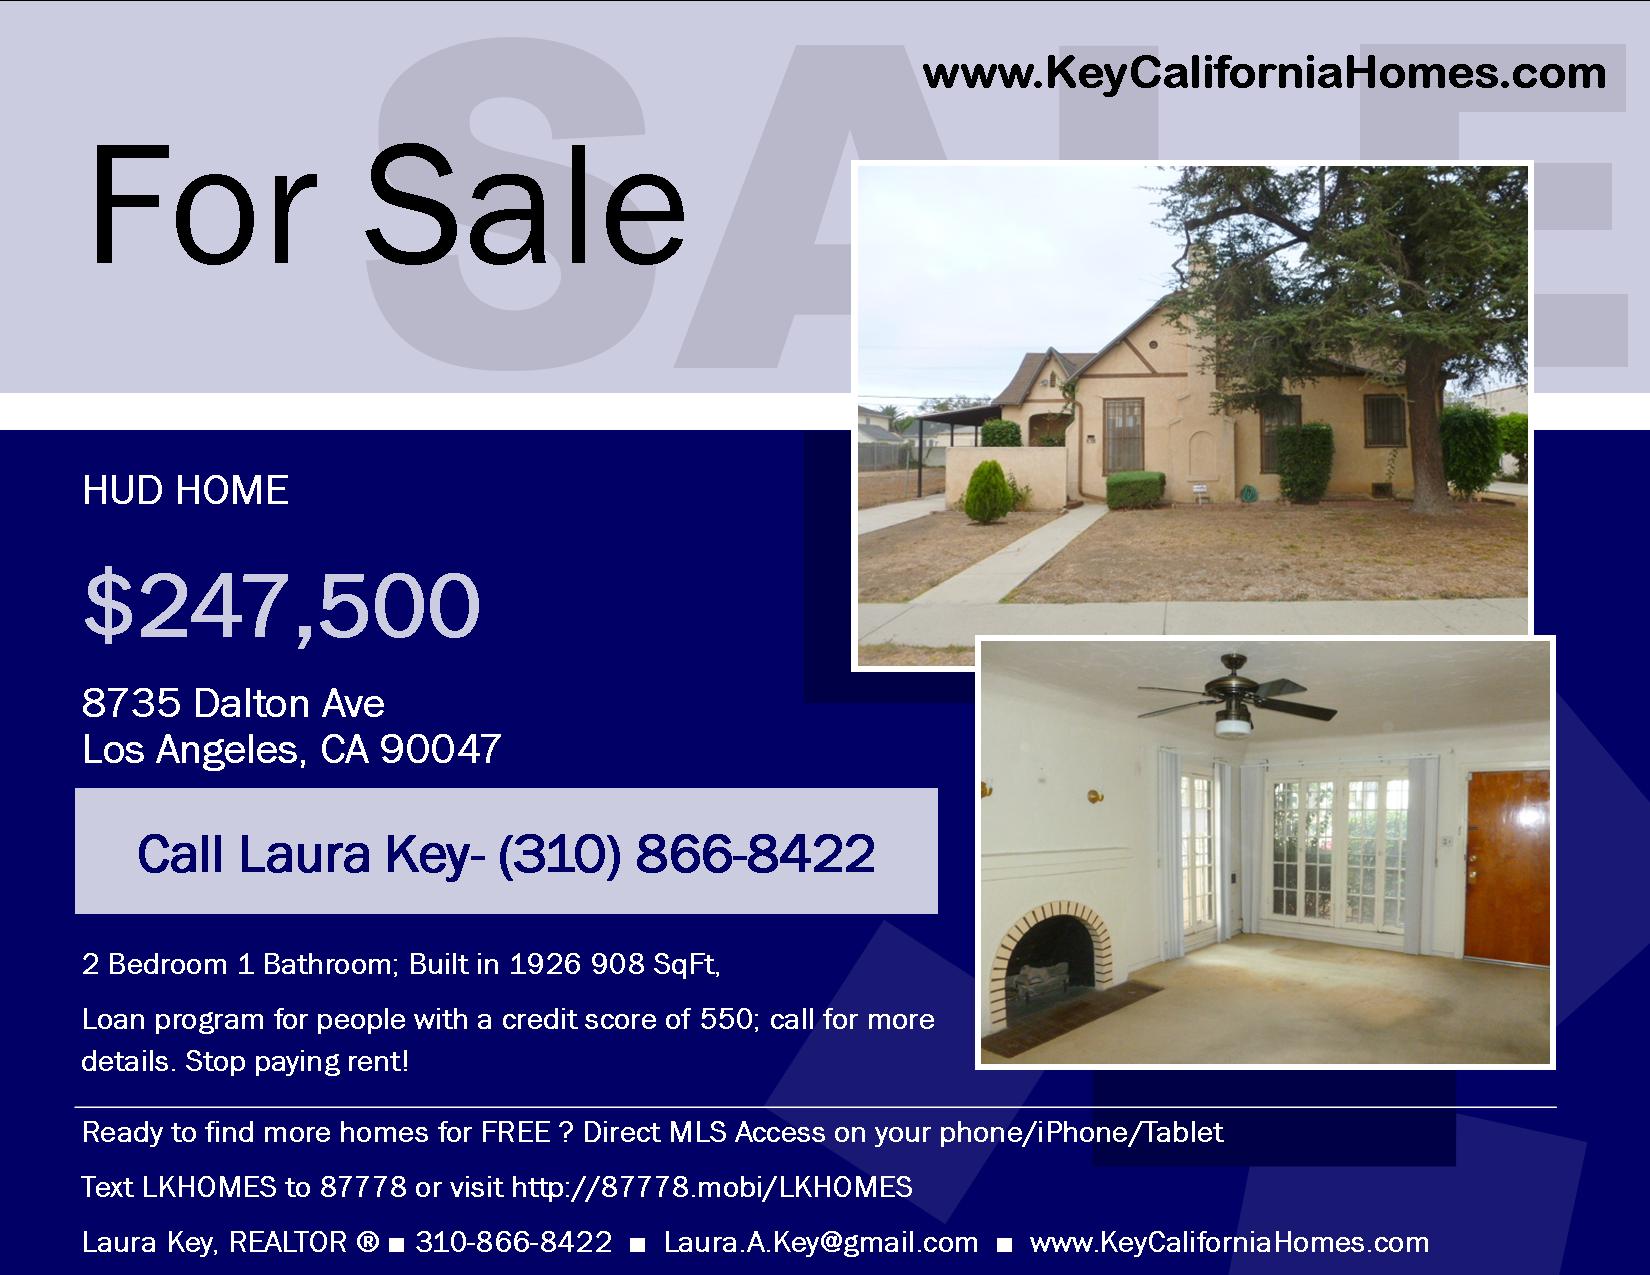 HUD Home! California is exploding in real estate again, buy now before it's too late!